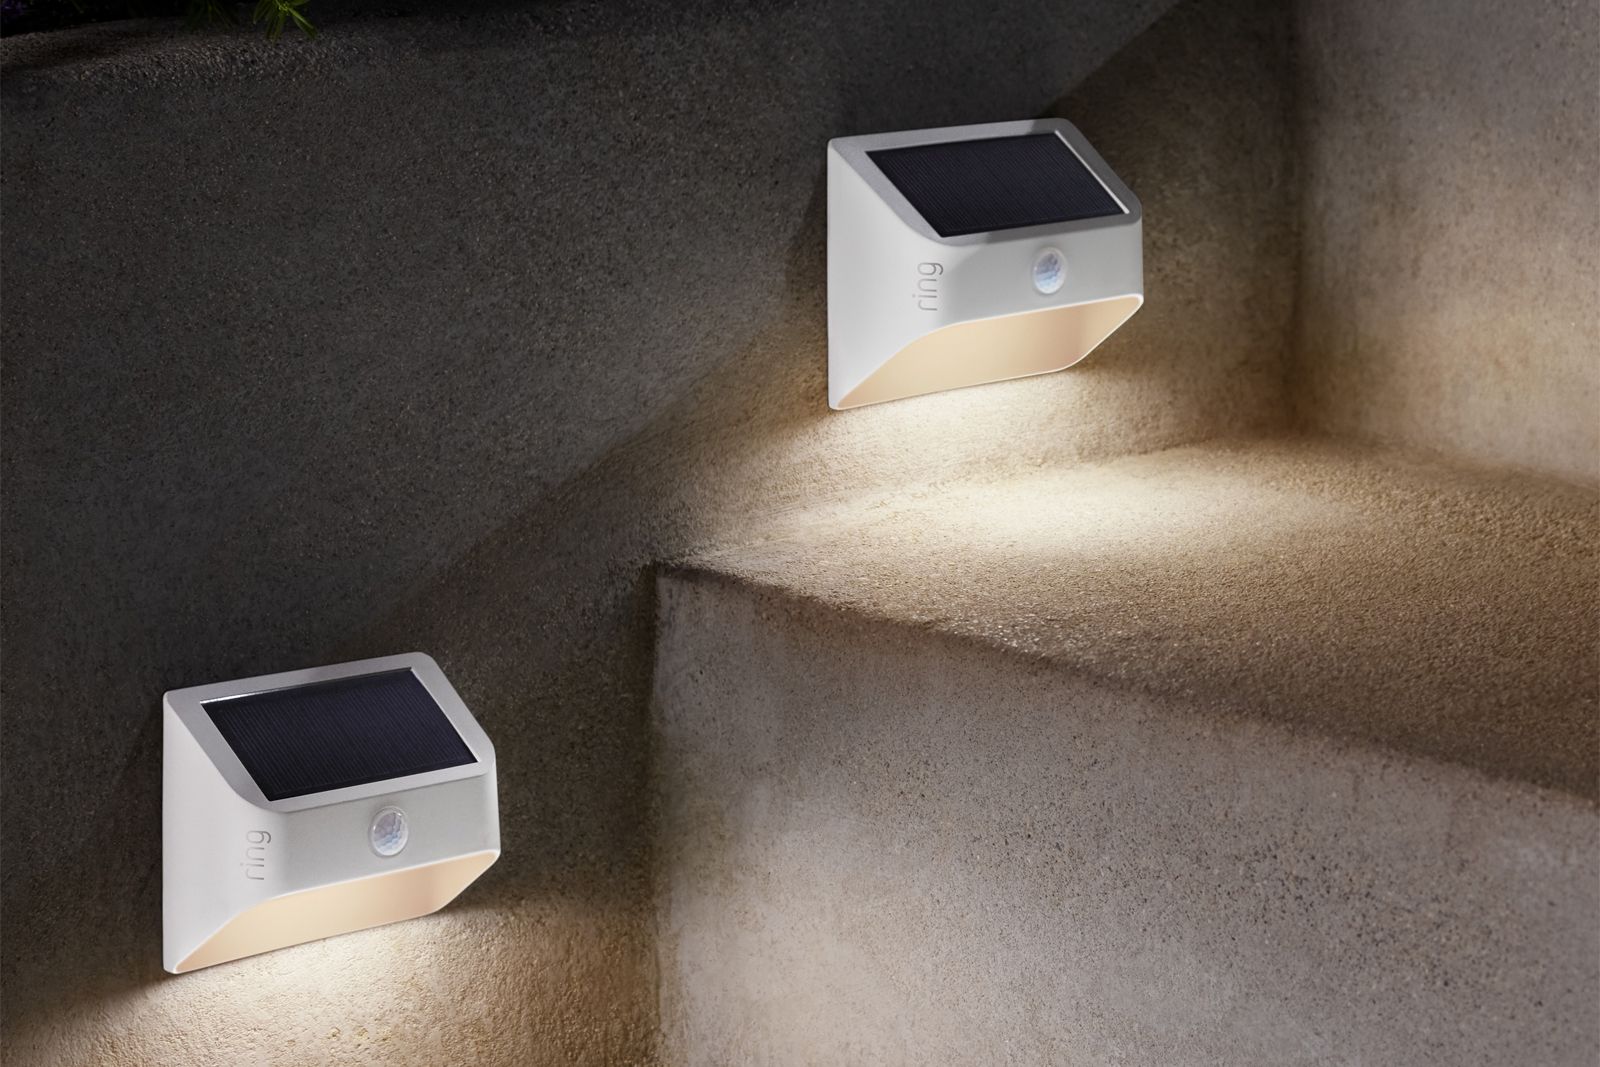 Ring covers even more of your home with solar-powered and indoor smart bulbs image 1